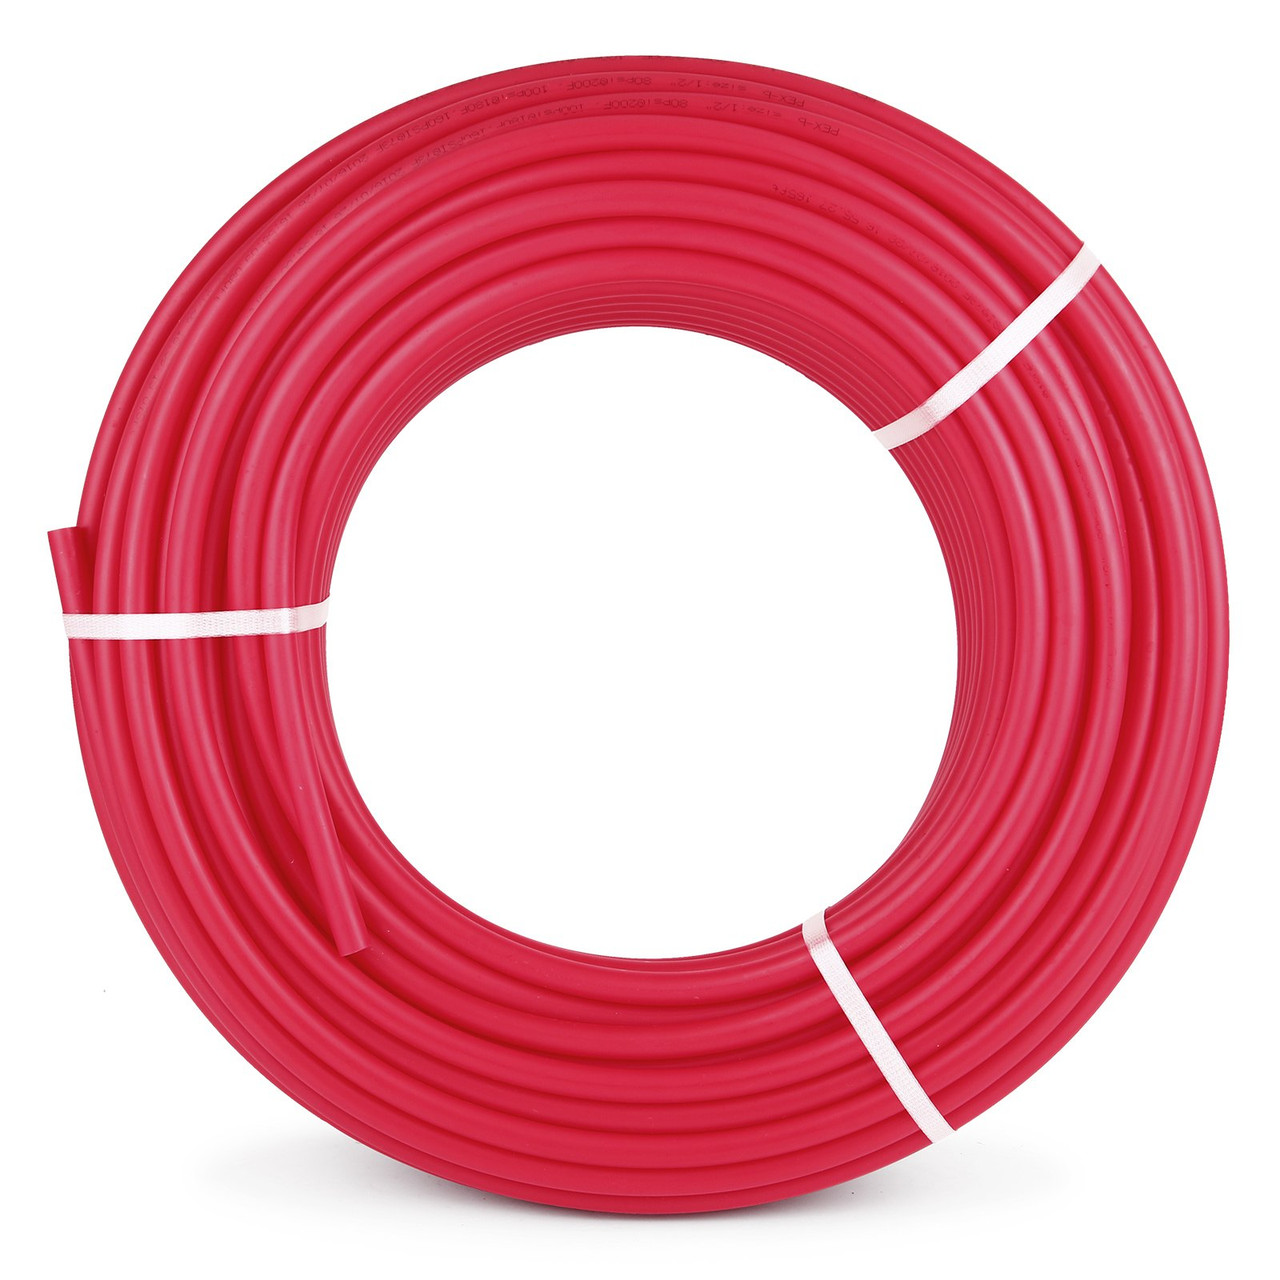 3/4" X 500Ft PEX Tubing Oxygen Barrier O2 EVOH Pex-B Red Hydronic Radiant Floor Heat Heating System Pex Pipe Pex Tube (3/4" O2-Barrier, 500Ft/Red)